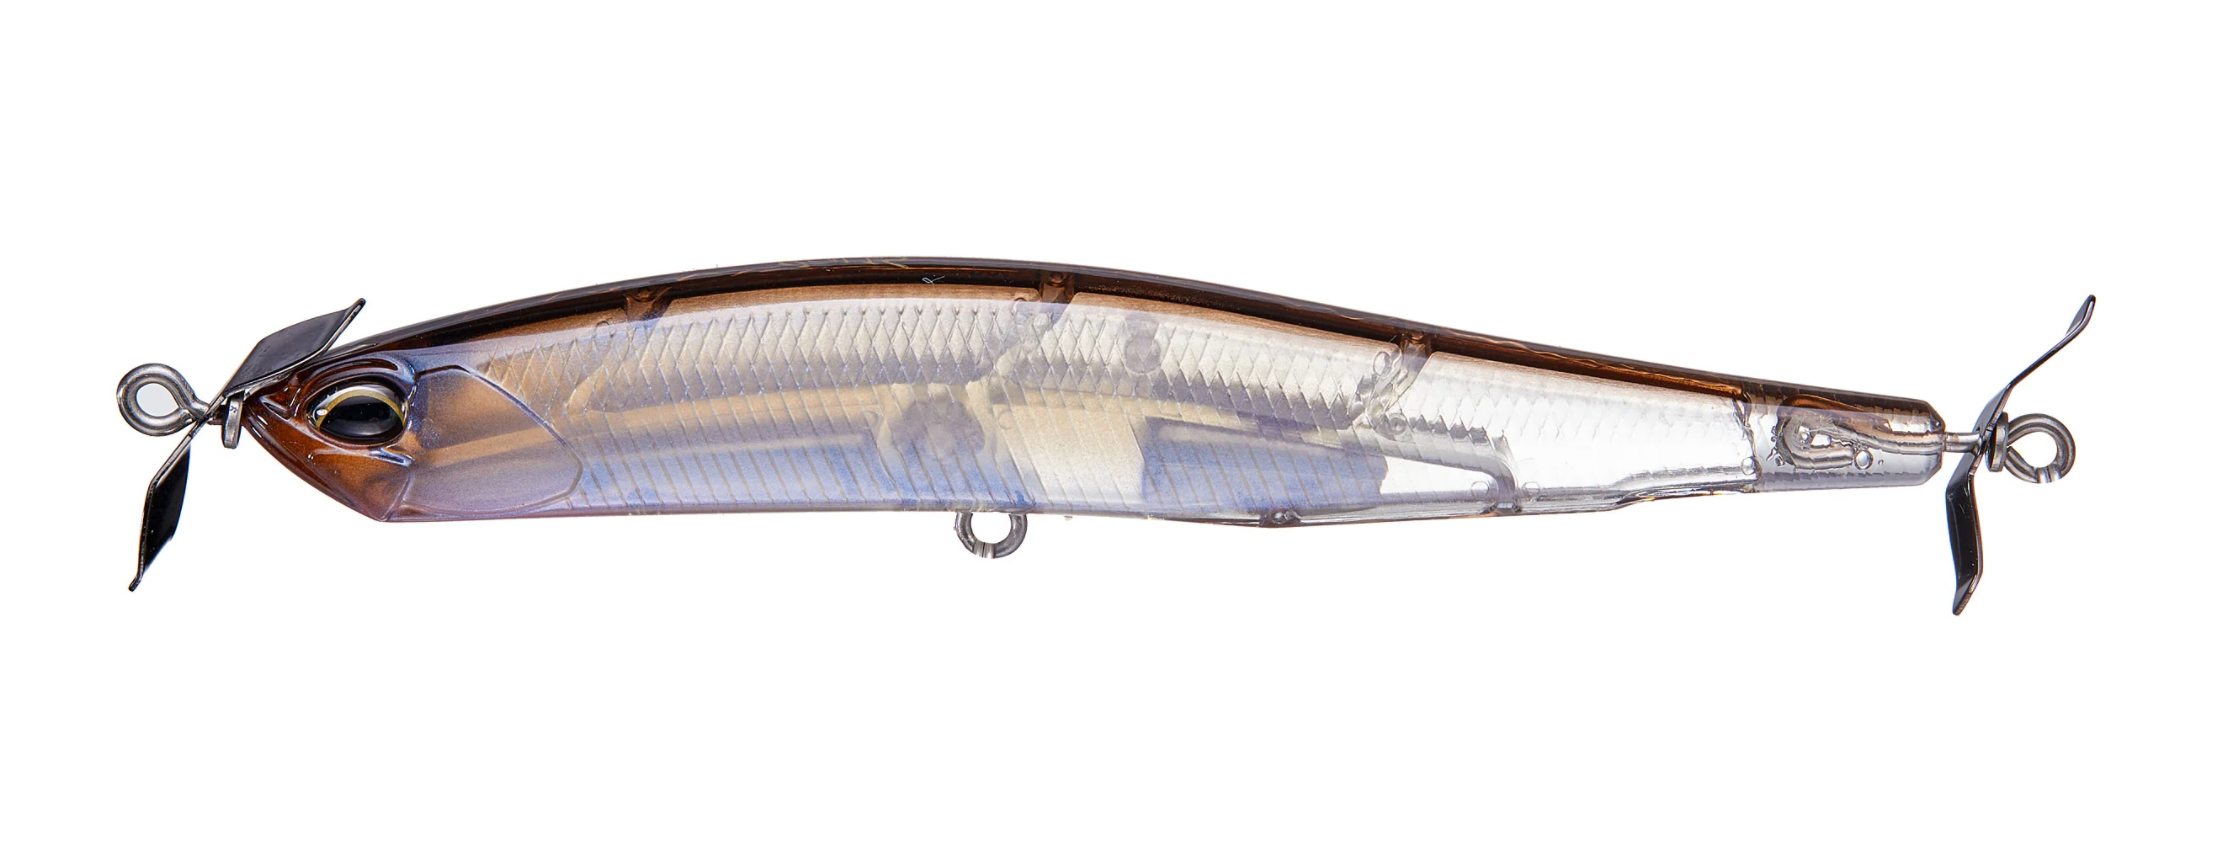 Duo Realis Spinbait 80 CL DACE